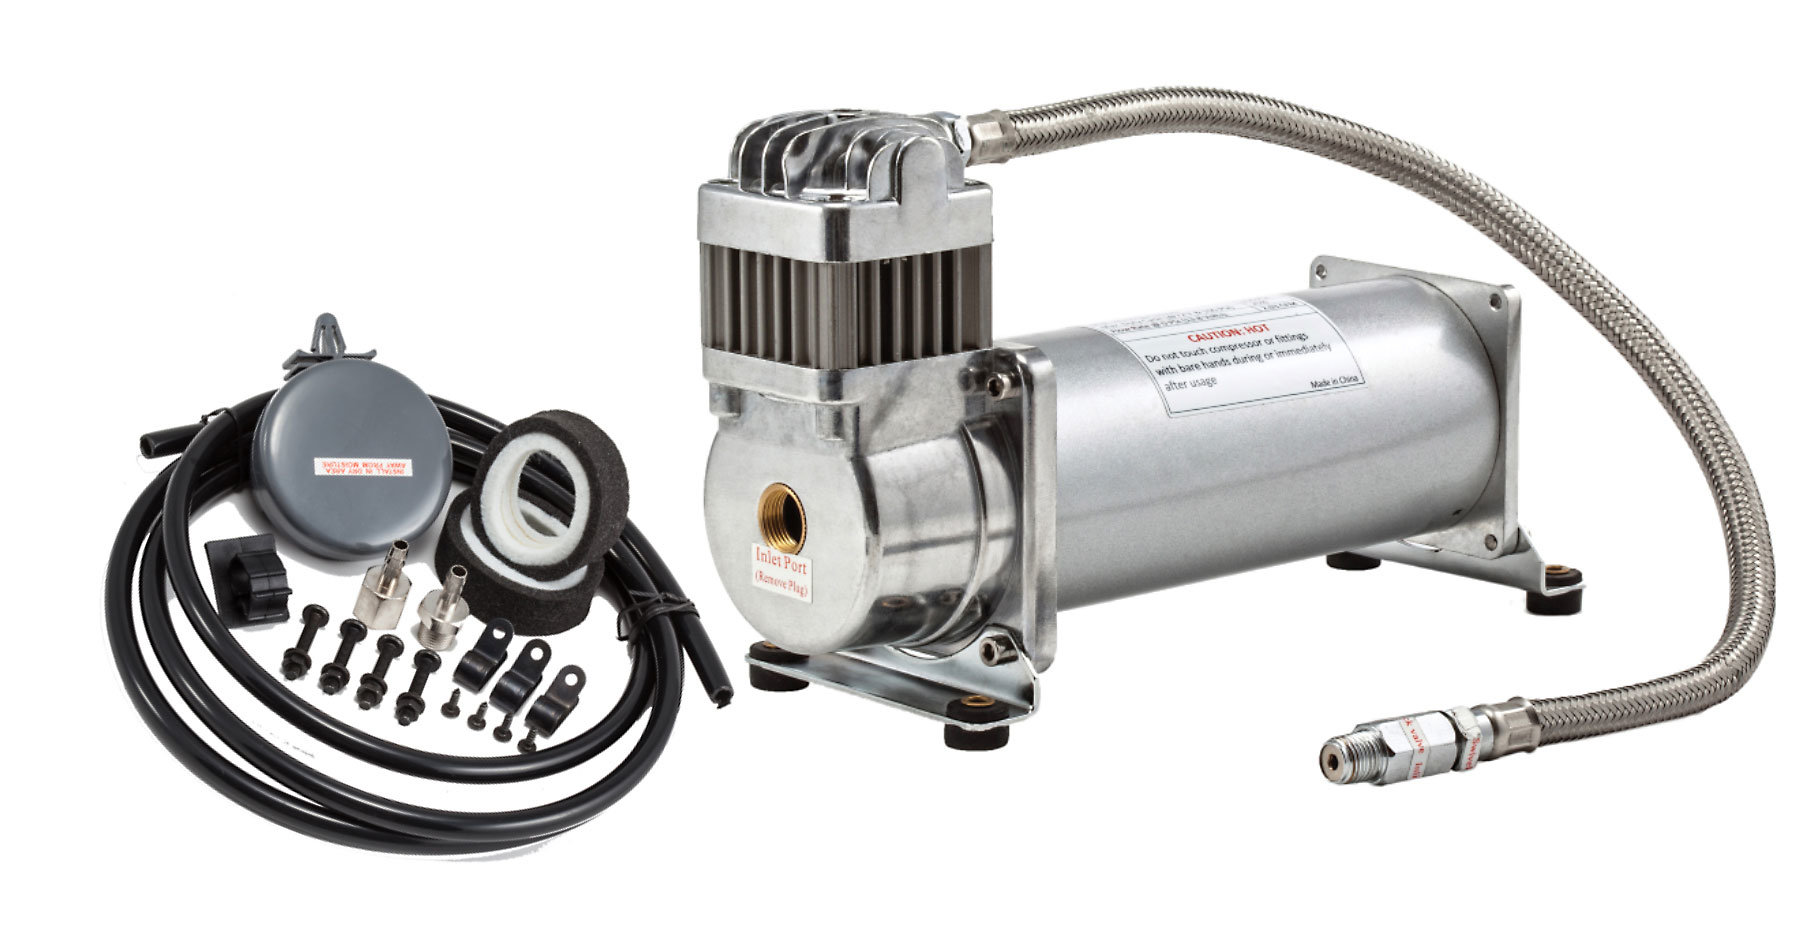 Kleinn Model 6120 110 PSI Compact All-In-One Onboard Air Compressor System